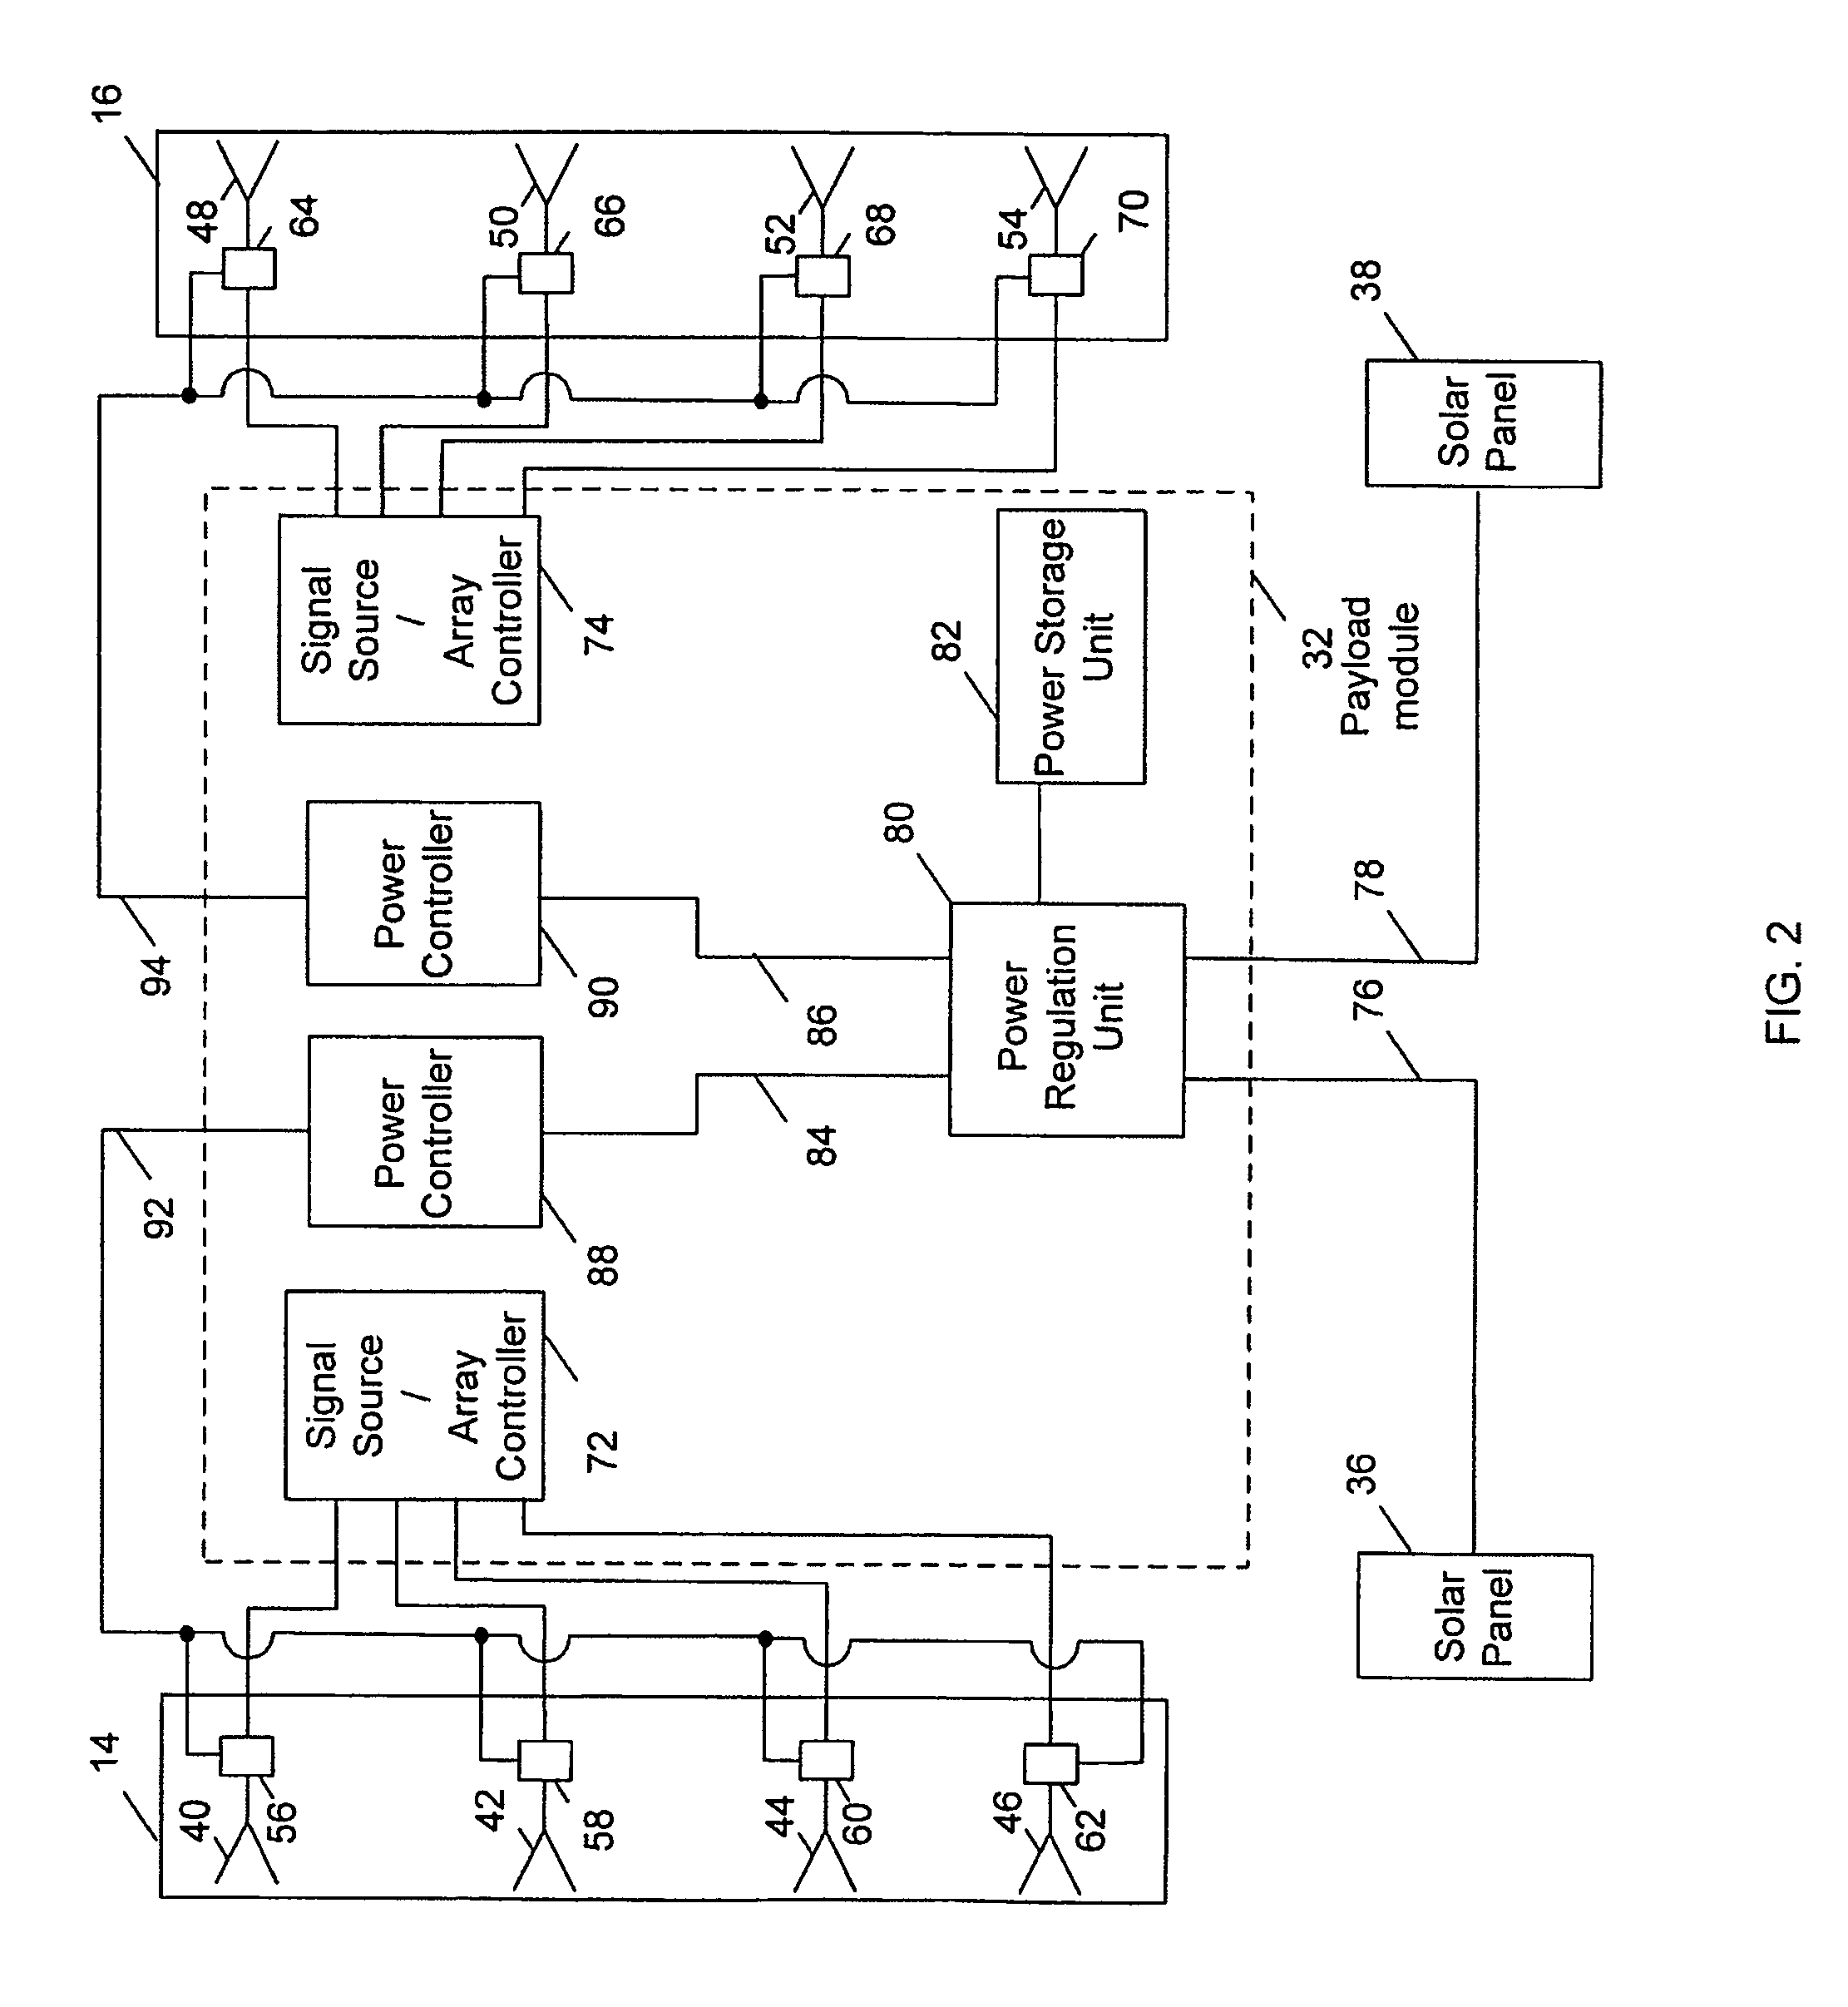 Method and system for flexibly distributing power in a phased array antenna system